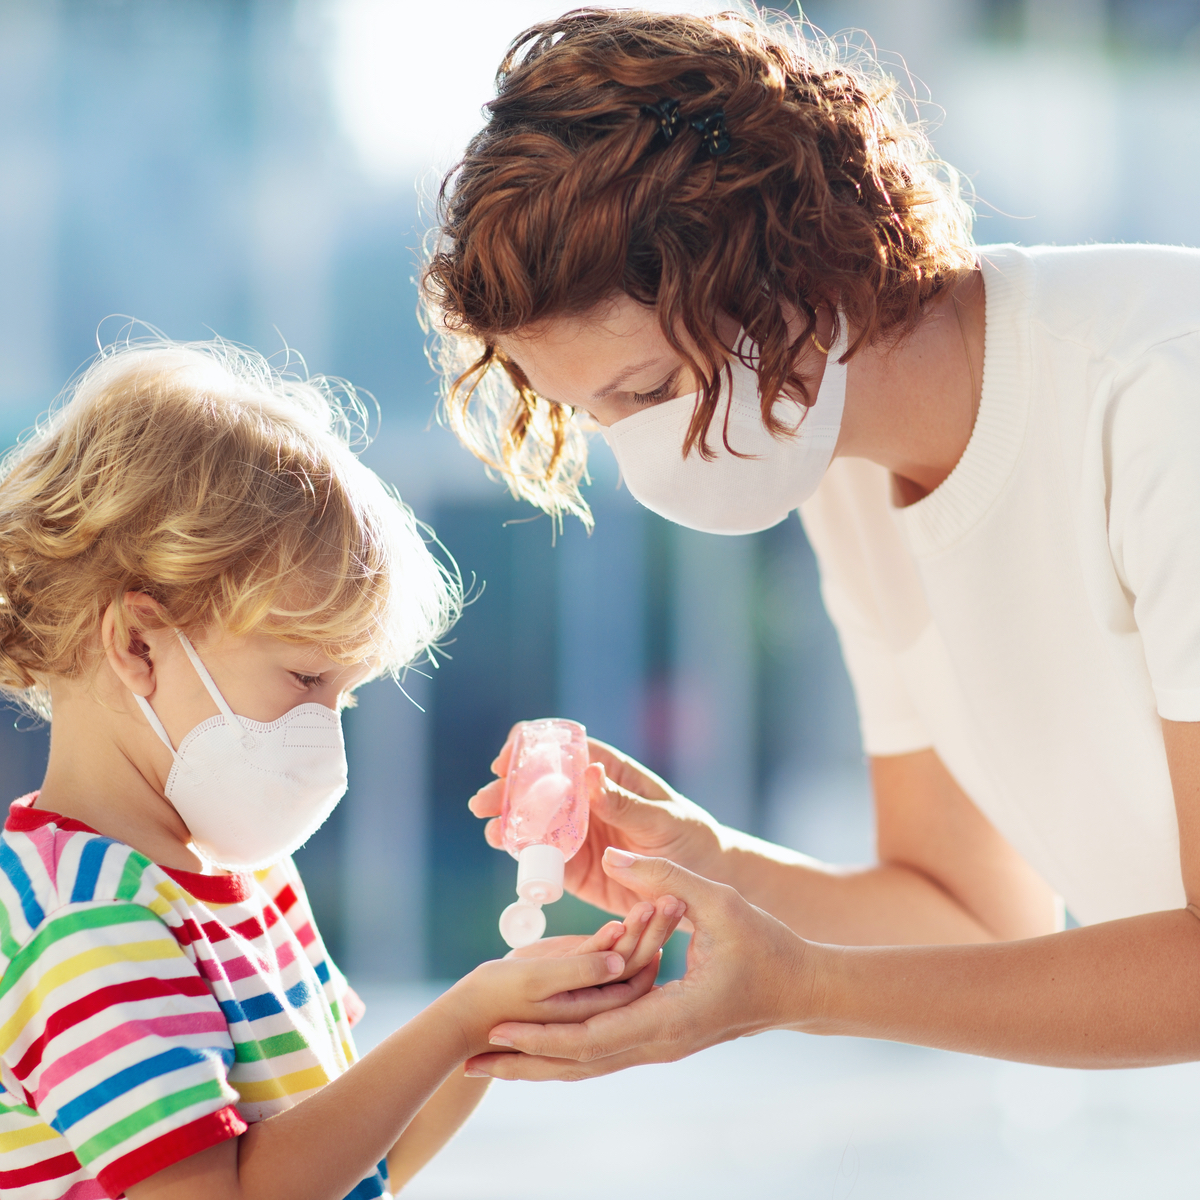 Masked mother applying hand sanitizer to masked young child.